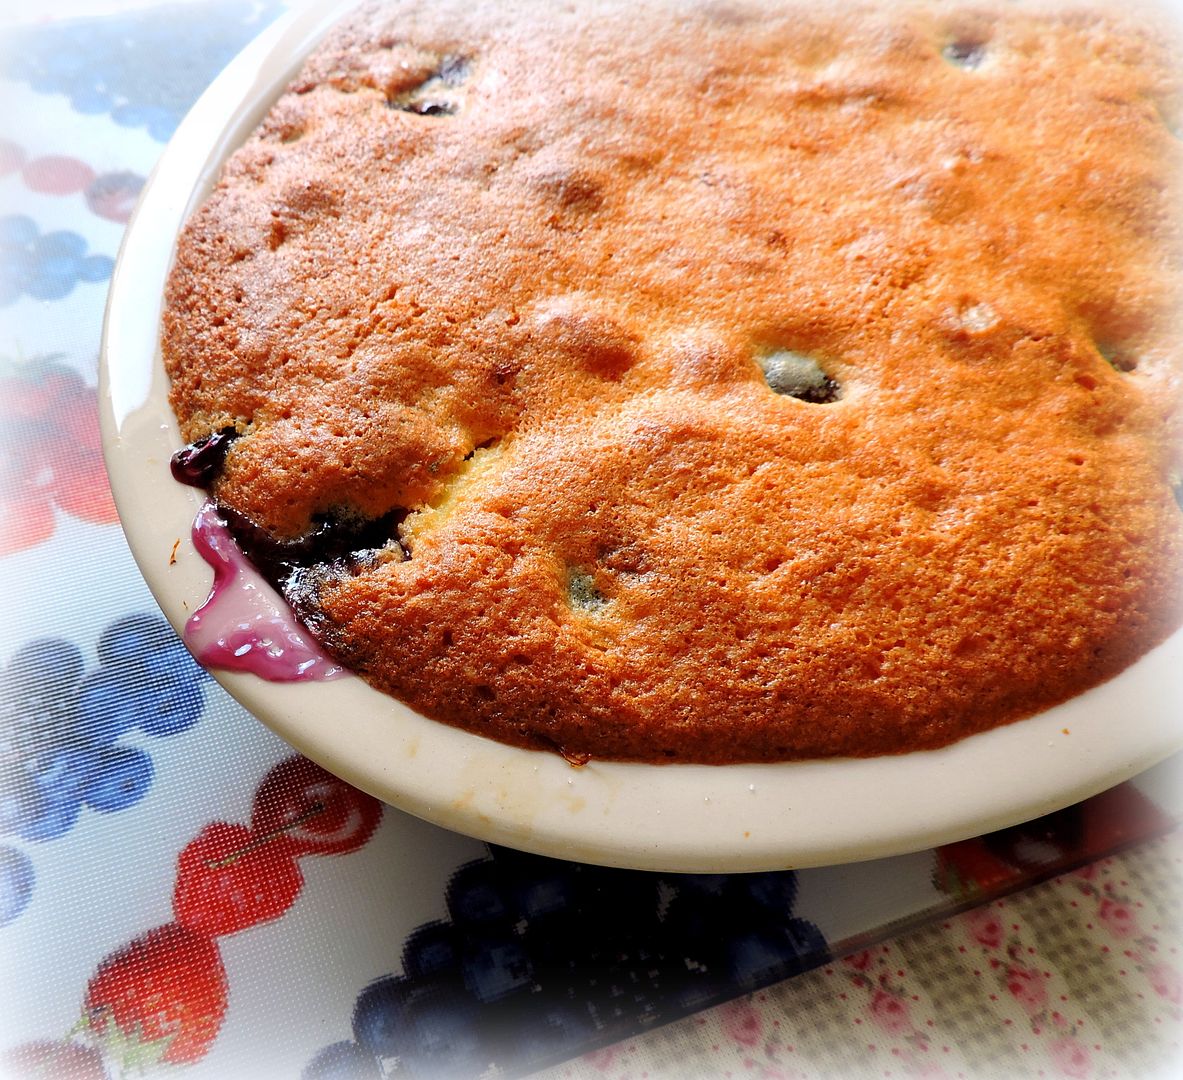 Apple & Blueberry Eve's Pudding